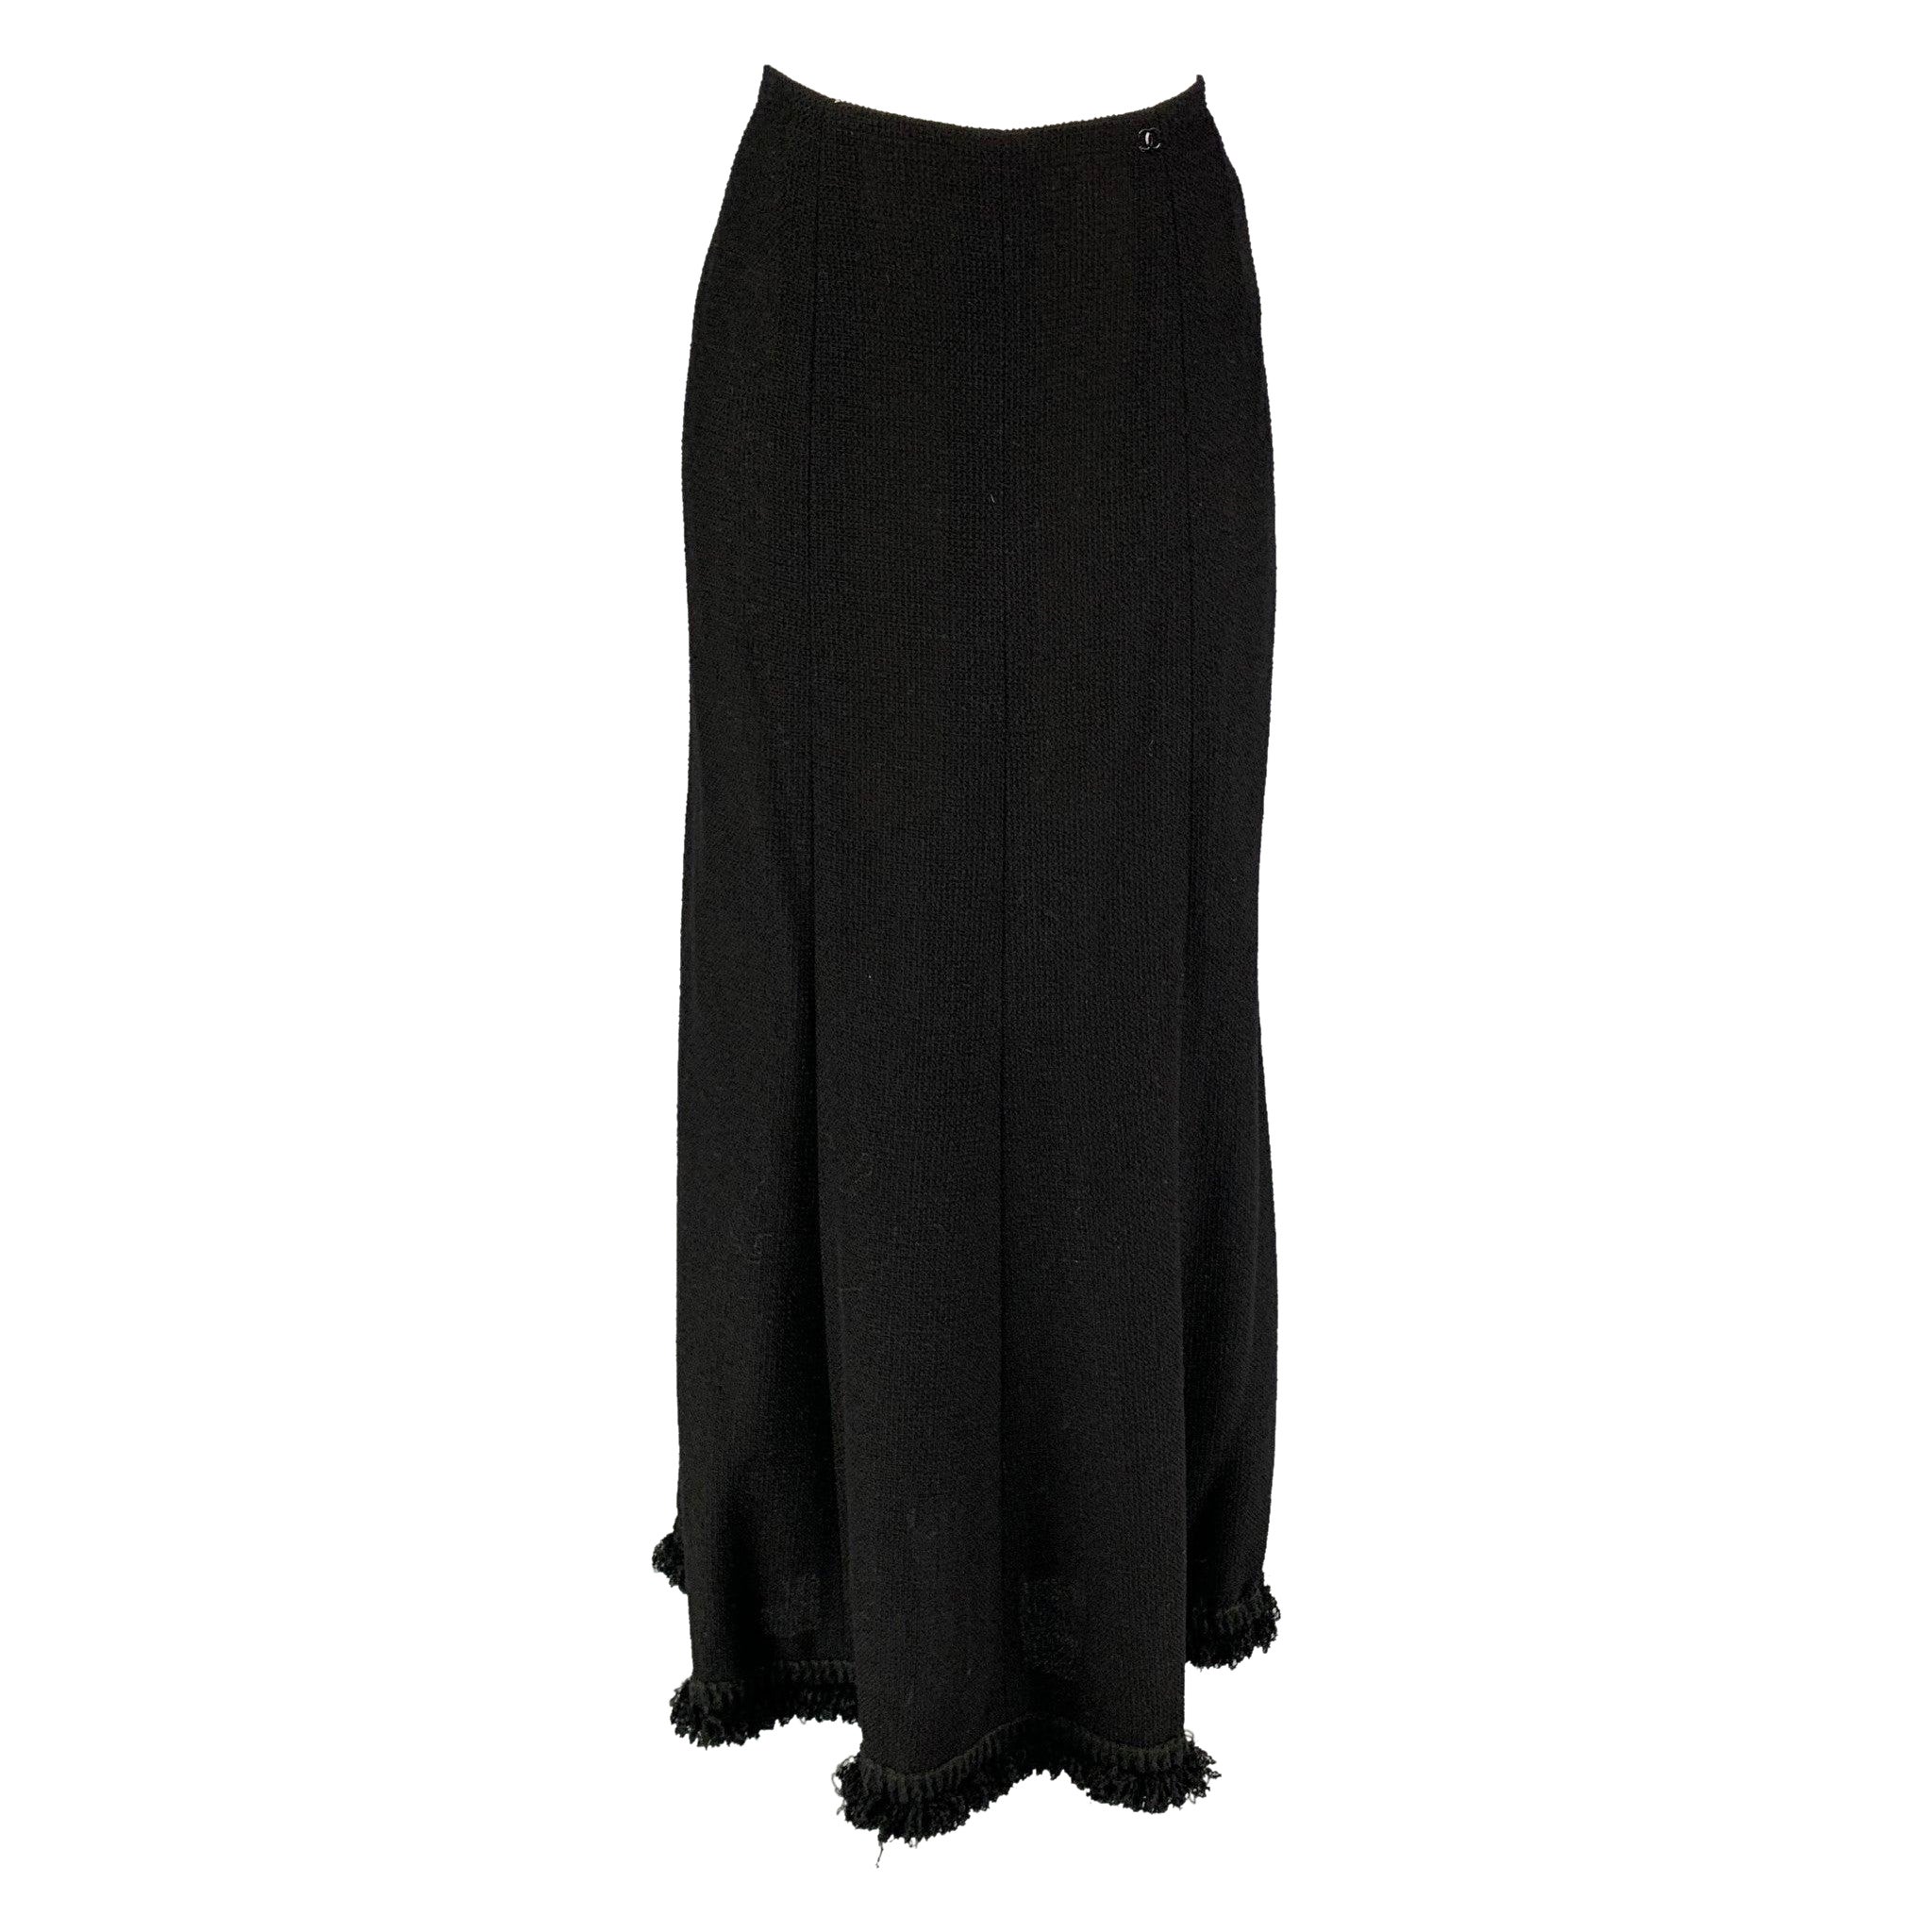 CHANEL Size 4 Black Wool Blend Textured Long Skirt For Sale